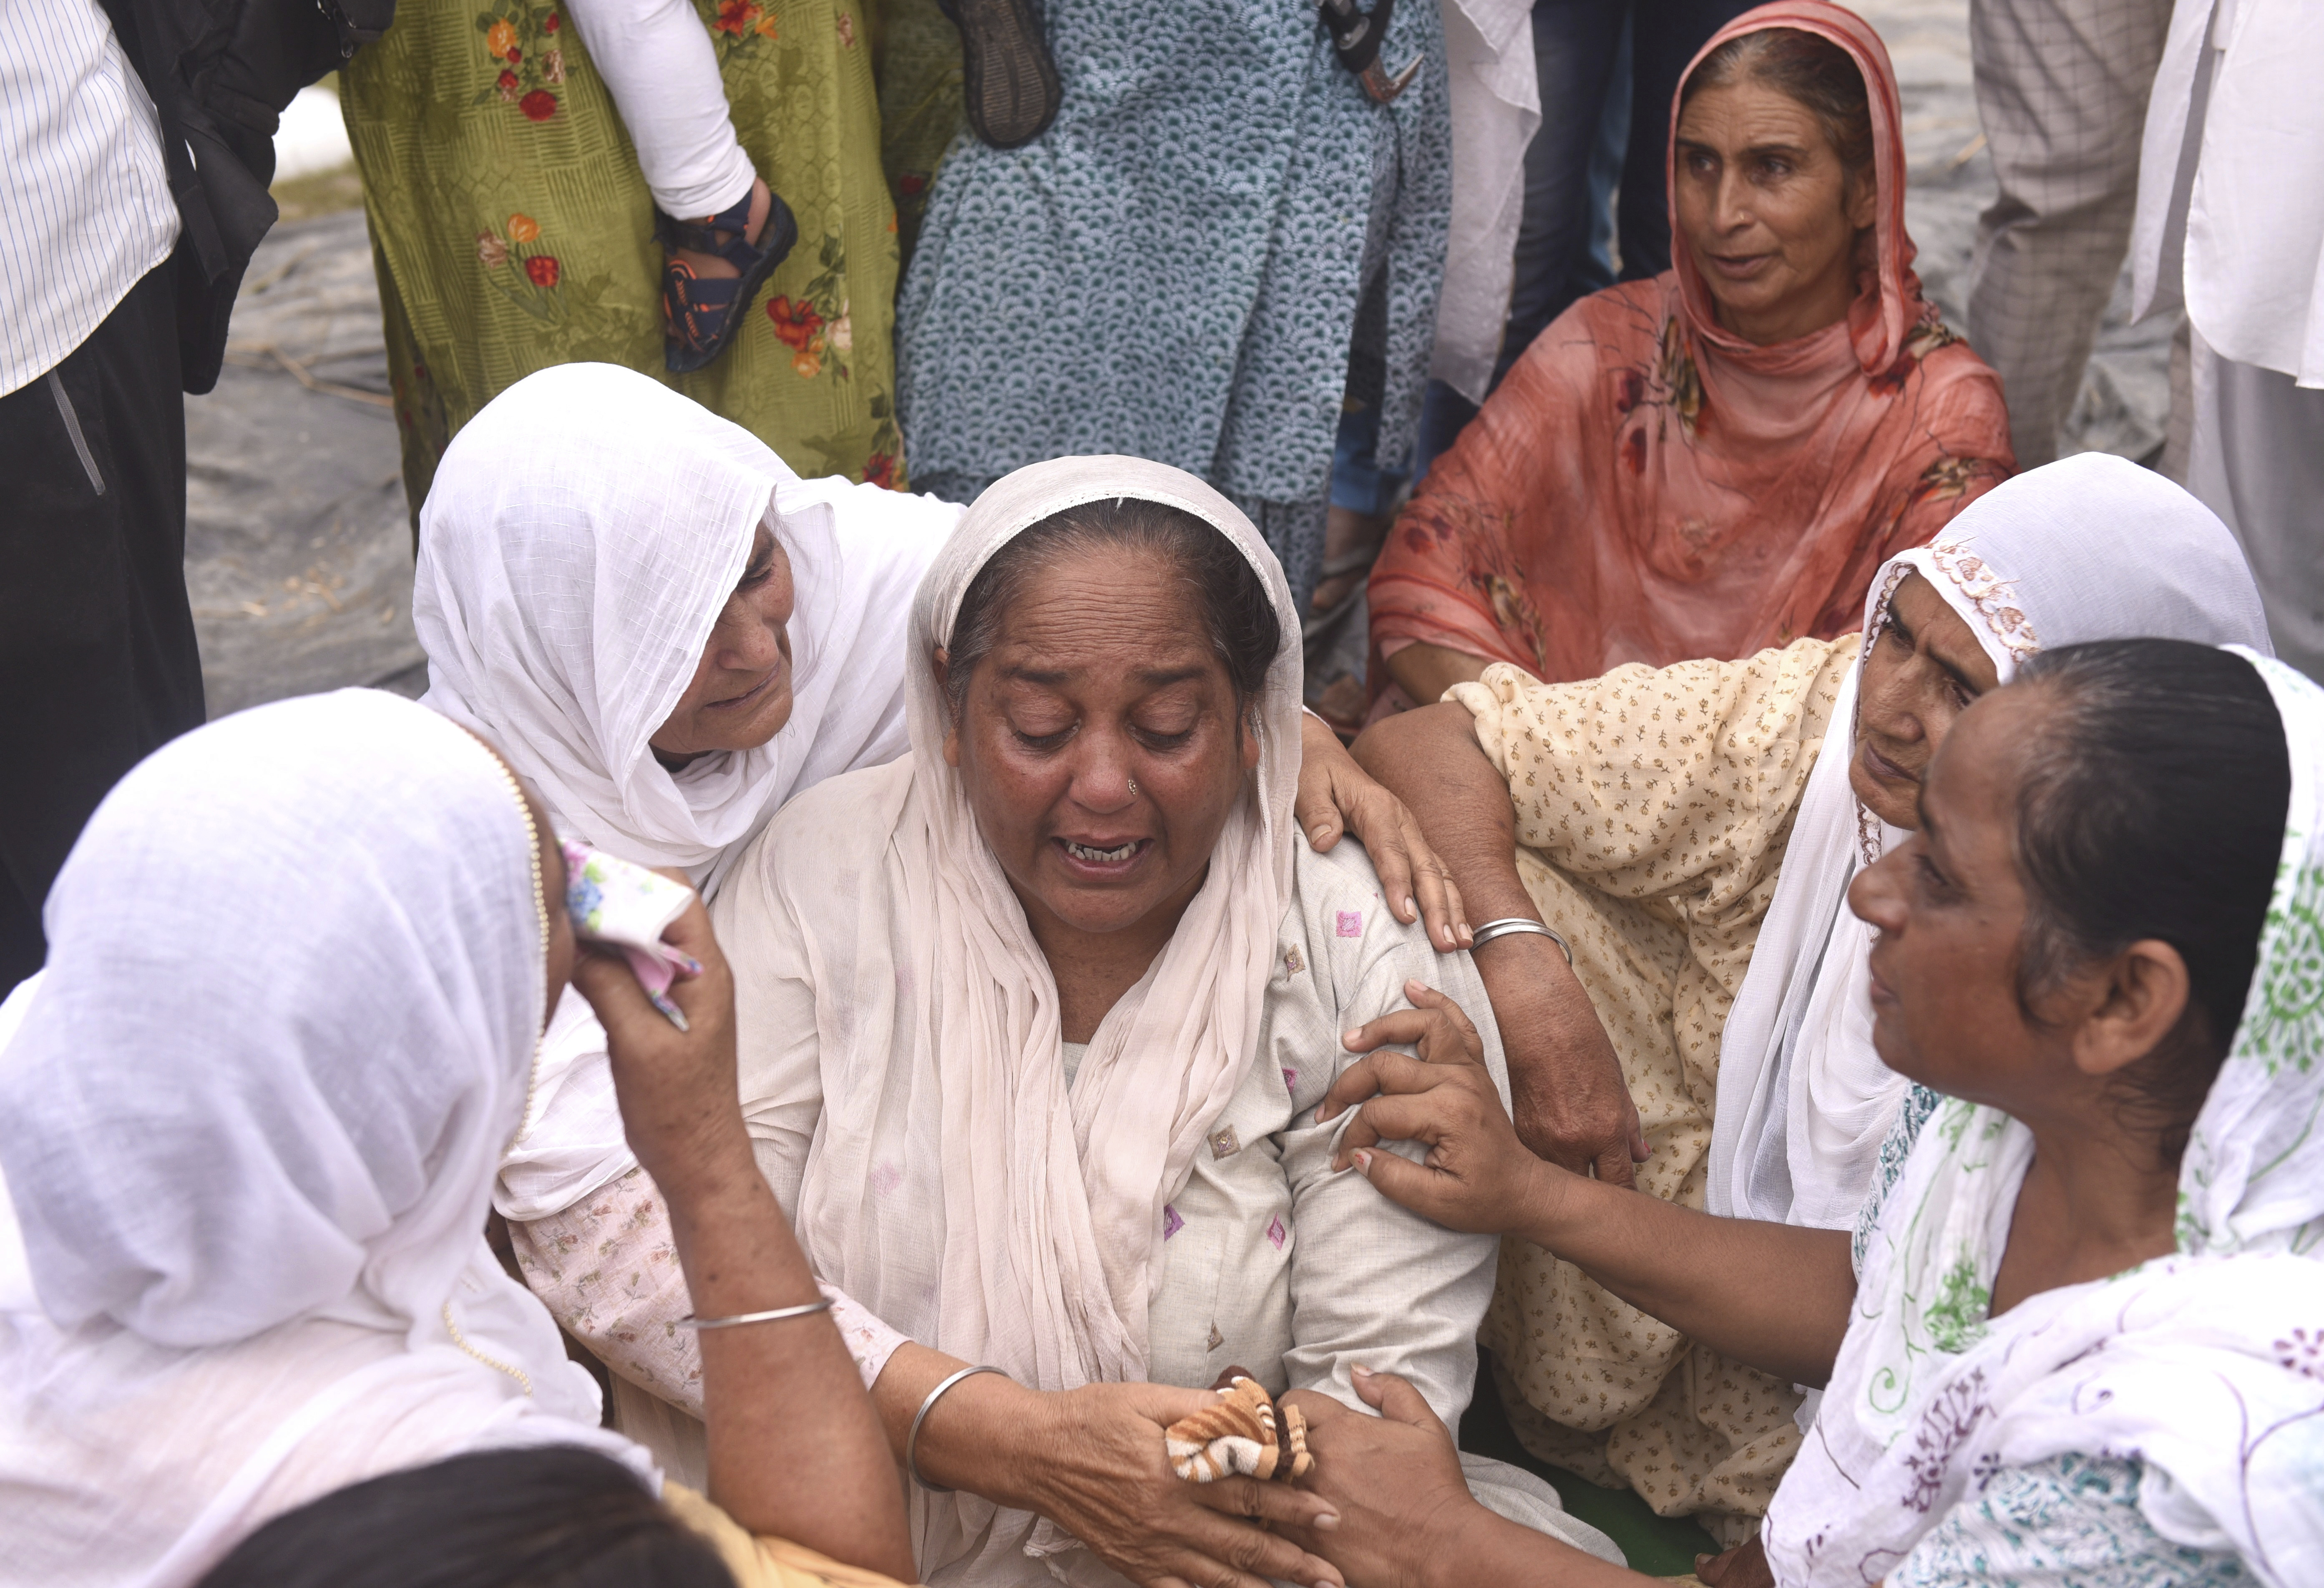 Relatives and neighbors of a farmer who was killed Sunday after being run over by a car owned by India's junior home minister mourn at Tikonia village in Lakhimpur Kheri, Uttar Pradesh state, India, Monday, Oct. 4, 2021. Indian police on Saturday, Oct. 9, arrested the son of a junior minister in Prime Minister Narendra Modi’s government as a suspect days after nine people were killed in a deadly escalation of yearlong demonstrations by tens of thousands of farmers against contentious agriculture laws in northern India, a police officer said. (AP Photo)